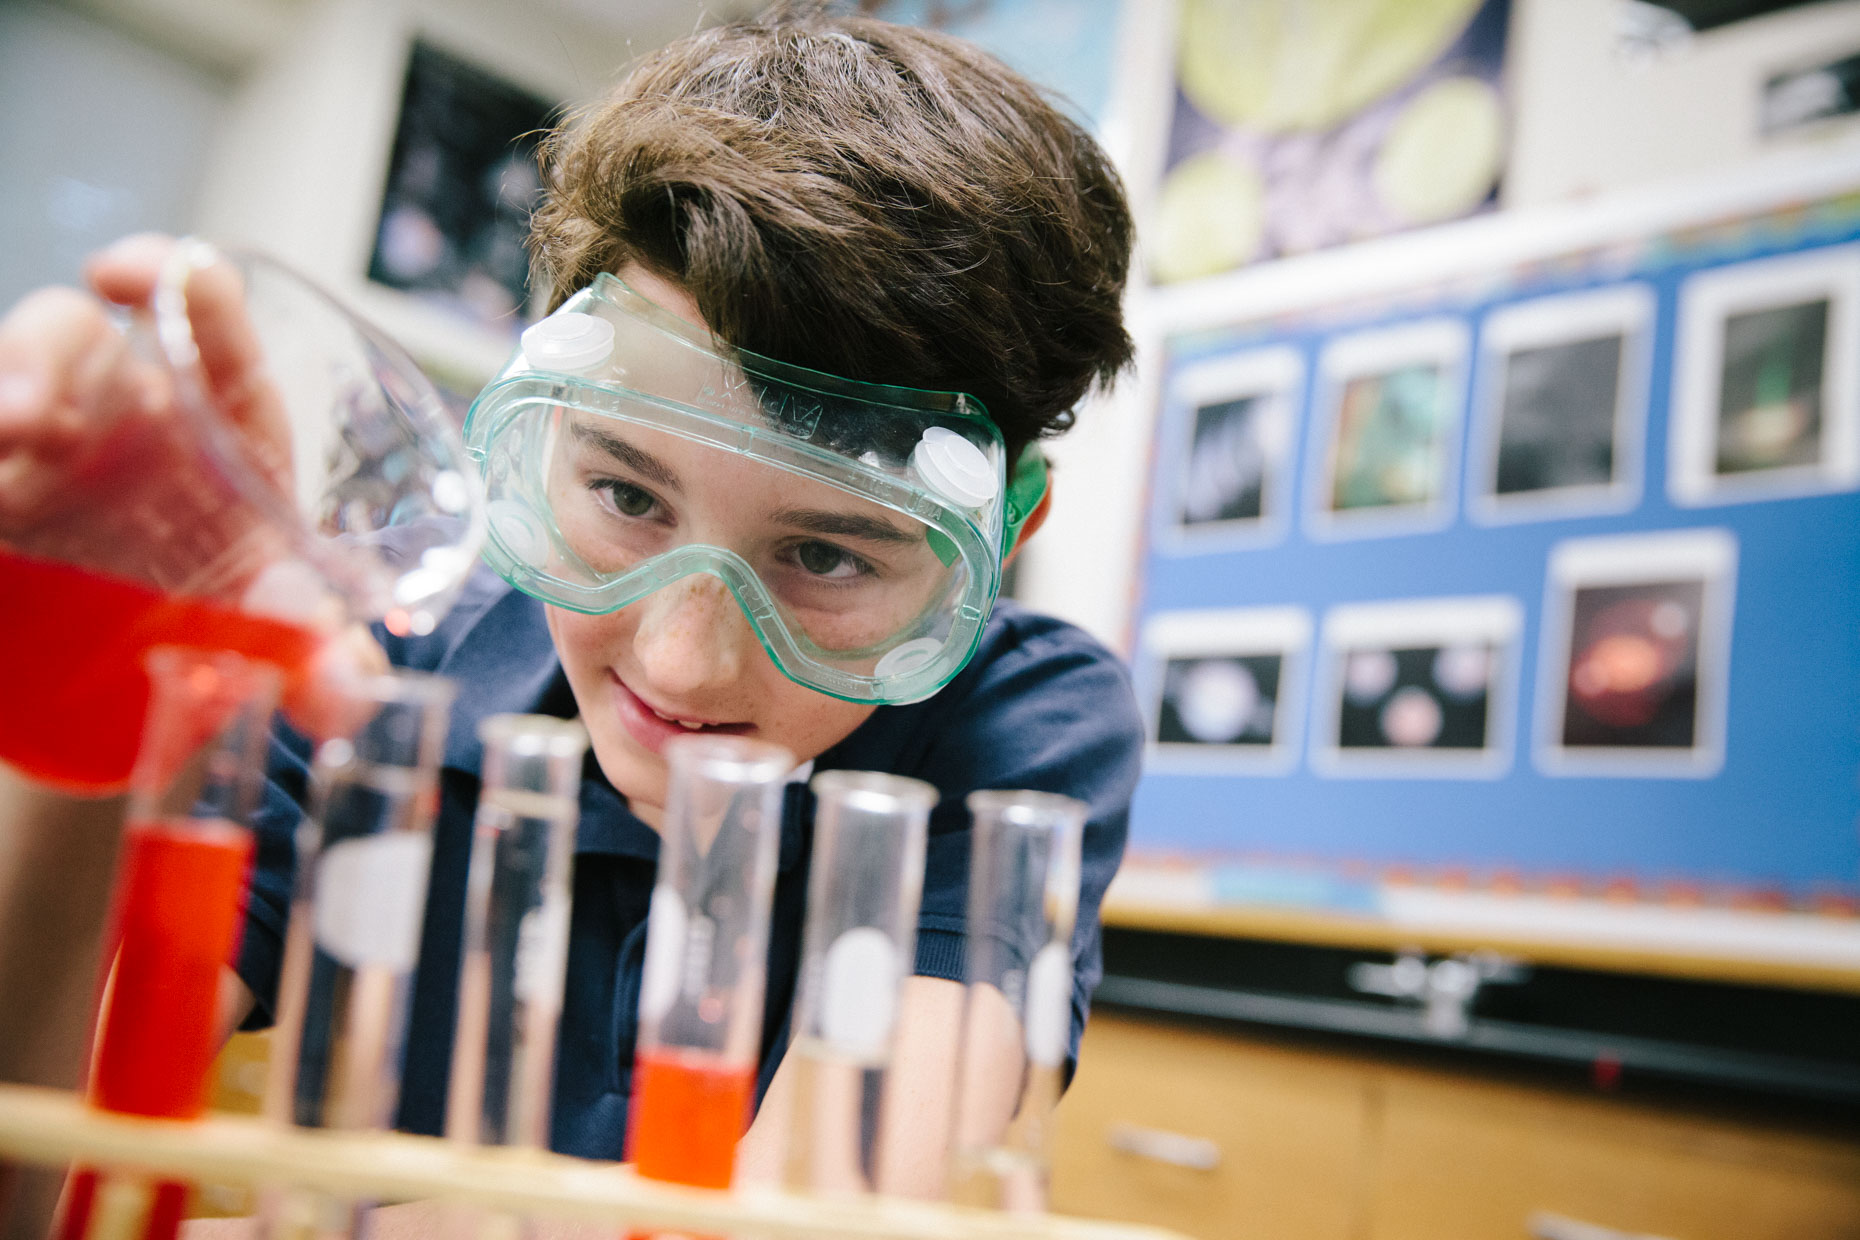 Boy doing science experiment in lab with safety goggles.